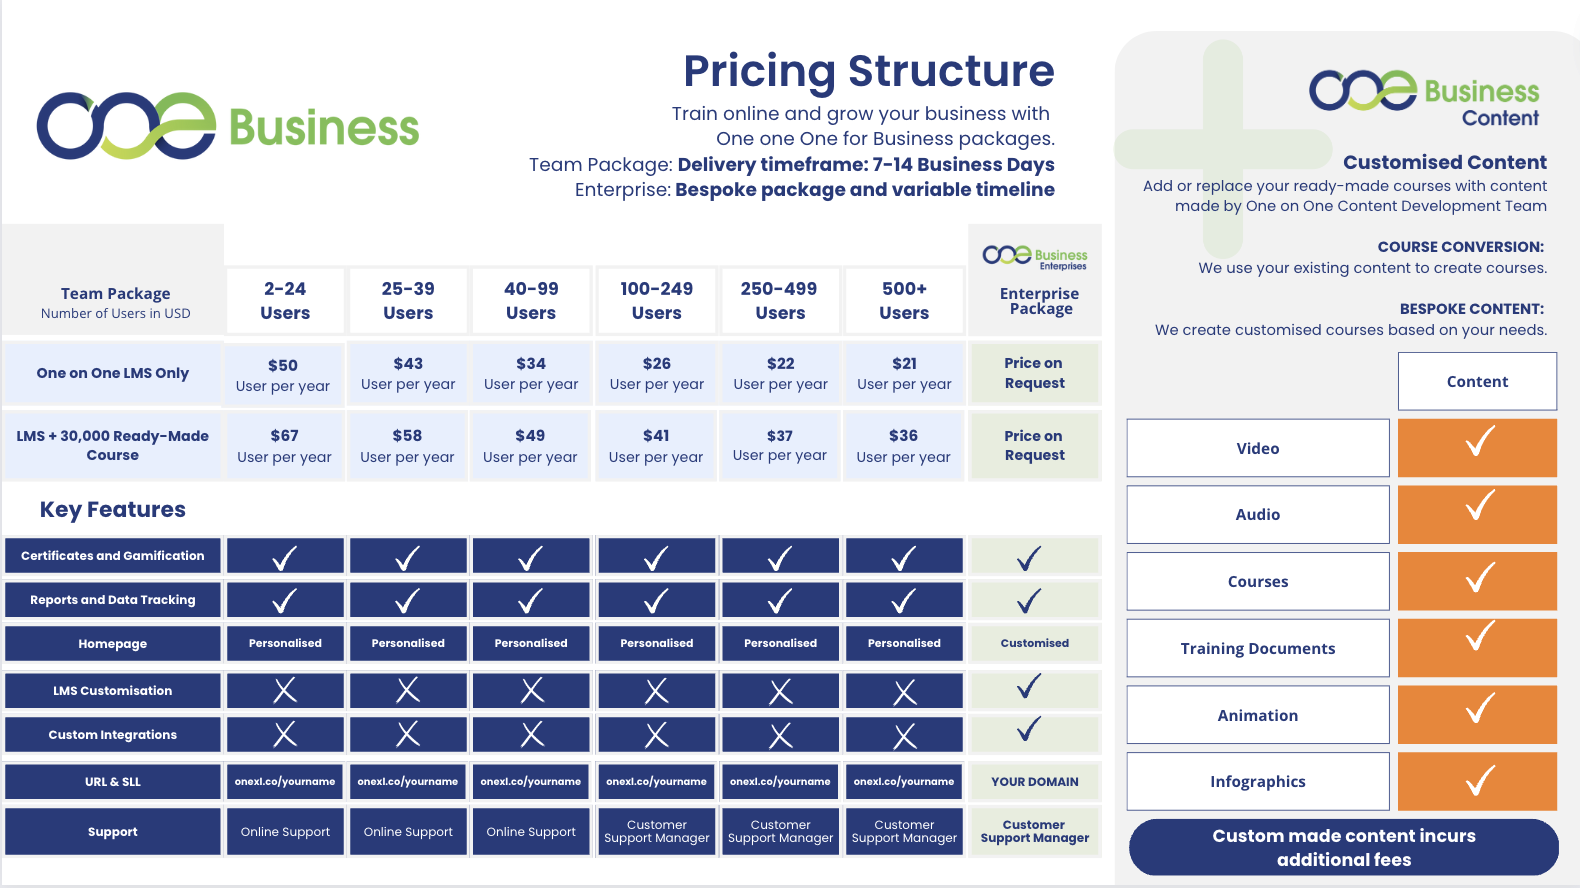 Pricing Table For One on One Business Teams